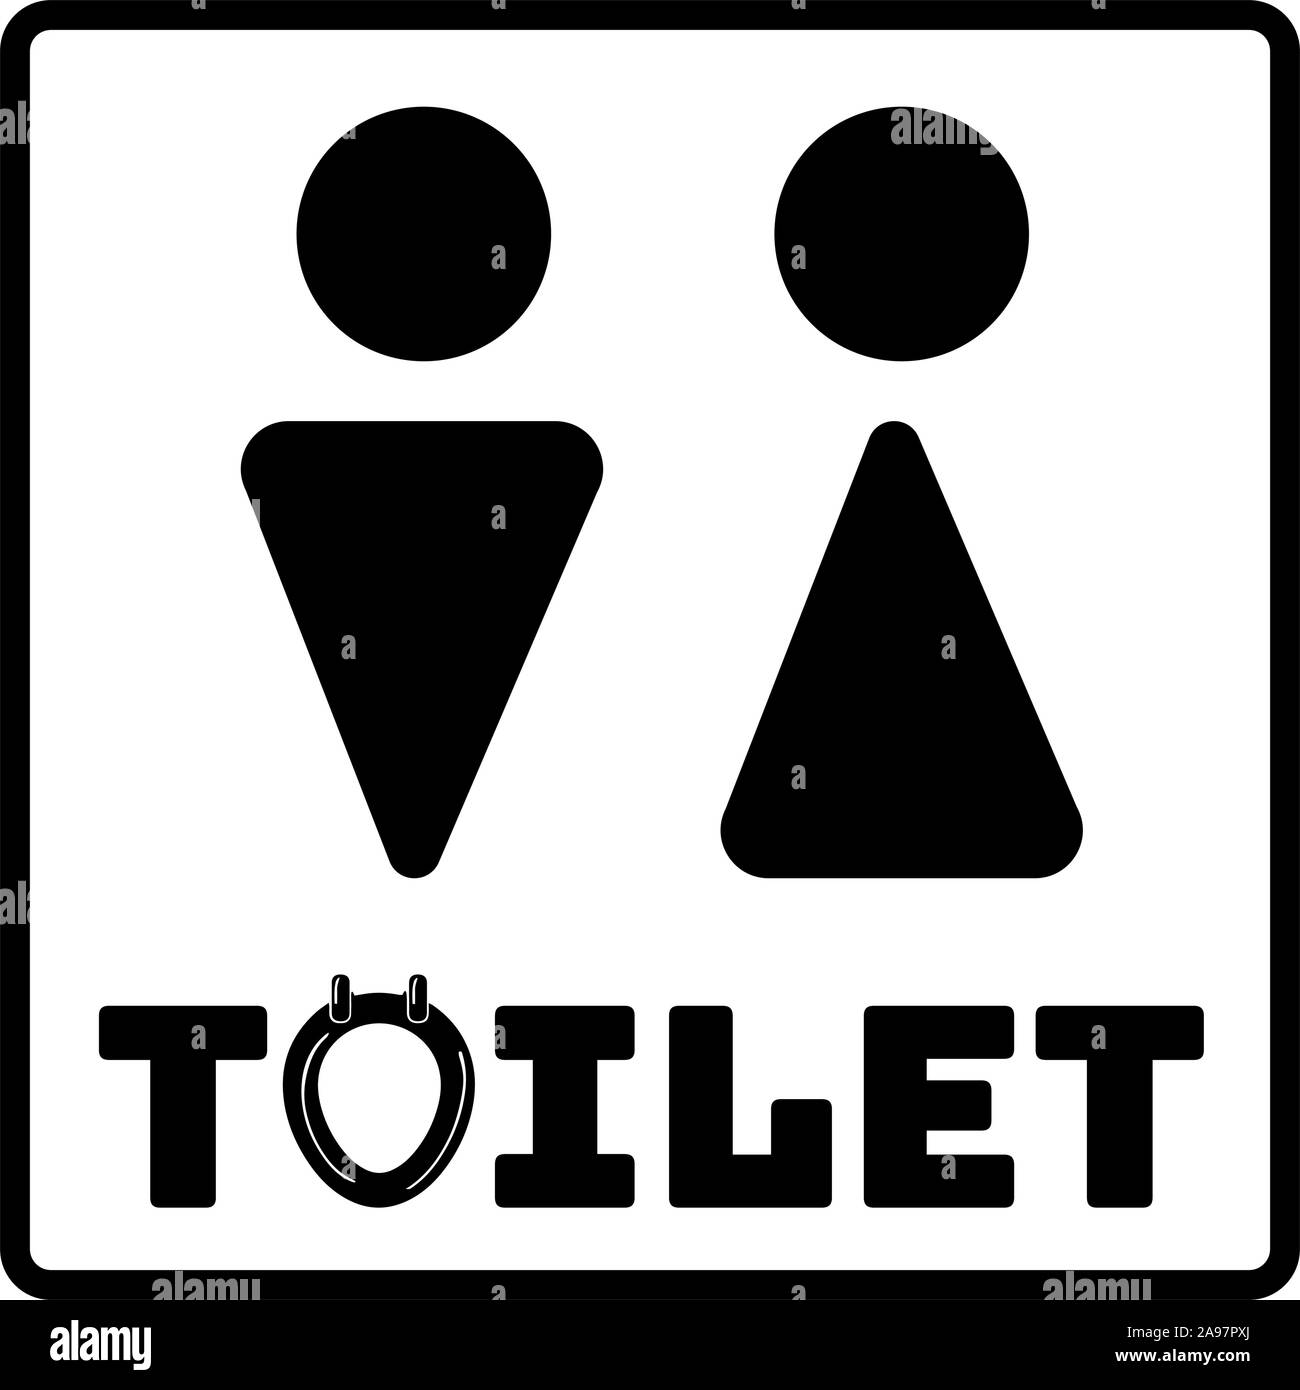 Toilet Sign vector illustration. Simply flat design for logo, objects and icons. Restroom for Male, Female, Ladies, Gentlemens. Stock Vector